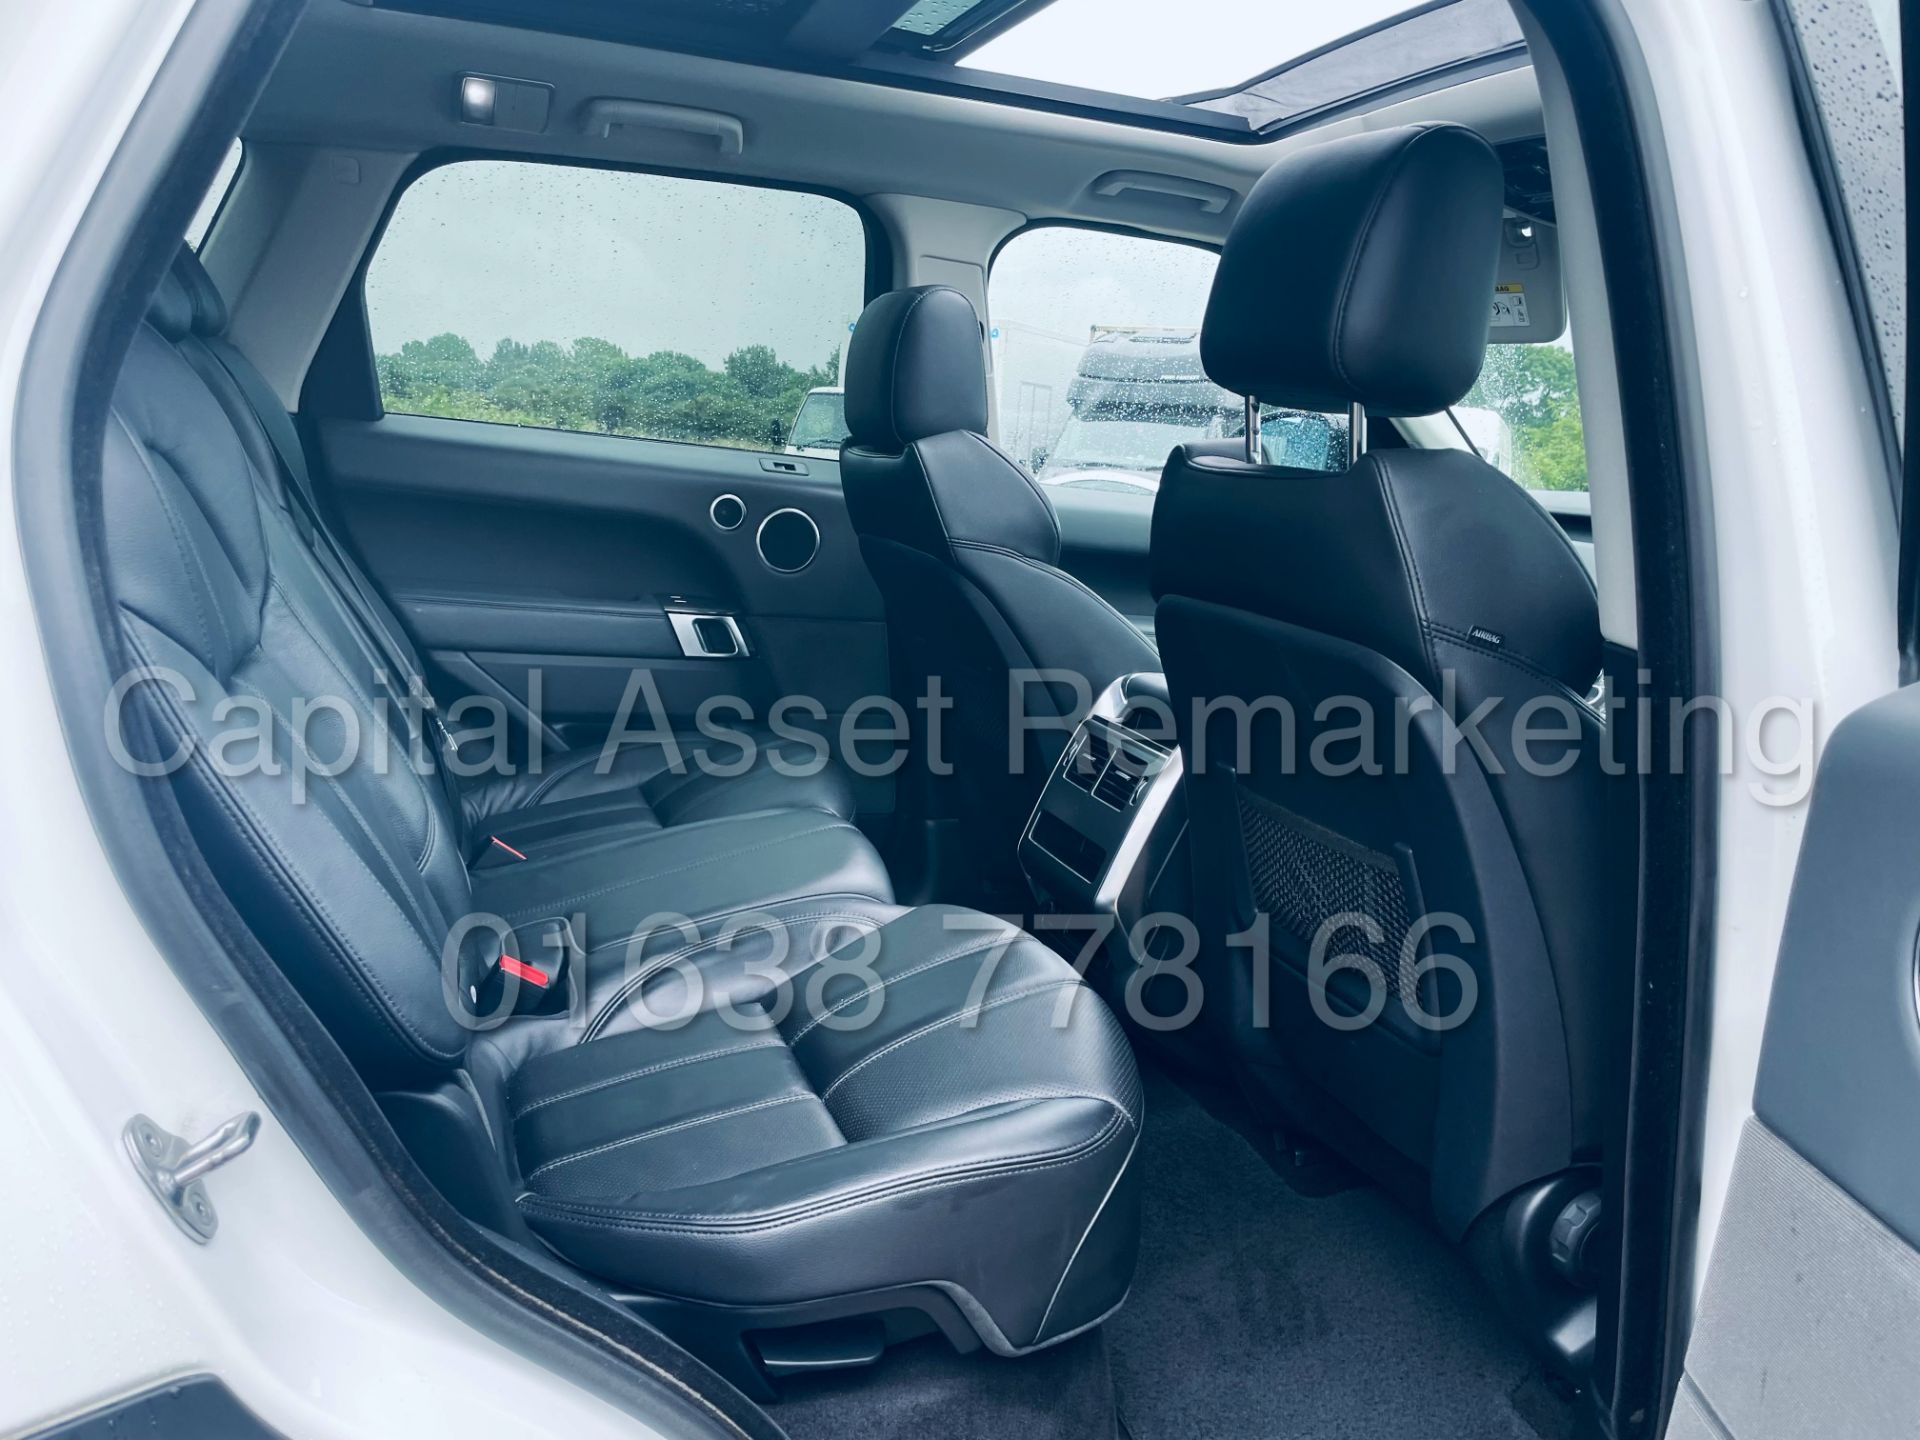 On Sale RANGE ROVER SPORT *SPECIAL EDITION* (2014) '3.0 TDV6 - AUTO' *SAT NAV & PAN ROOF* (TOP SPEC) - Image 30 of 54